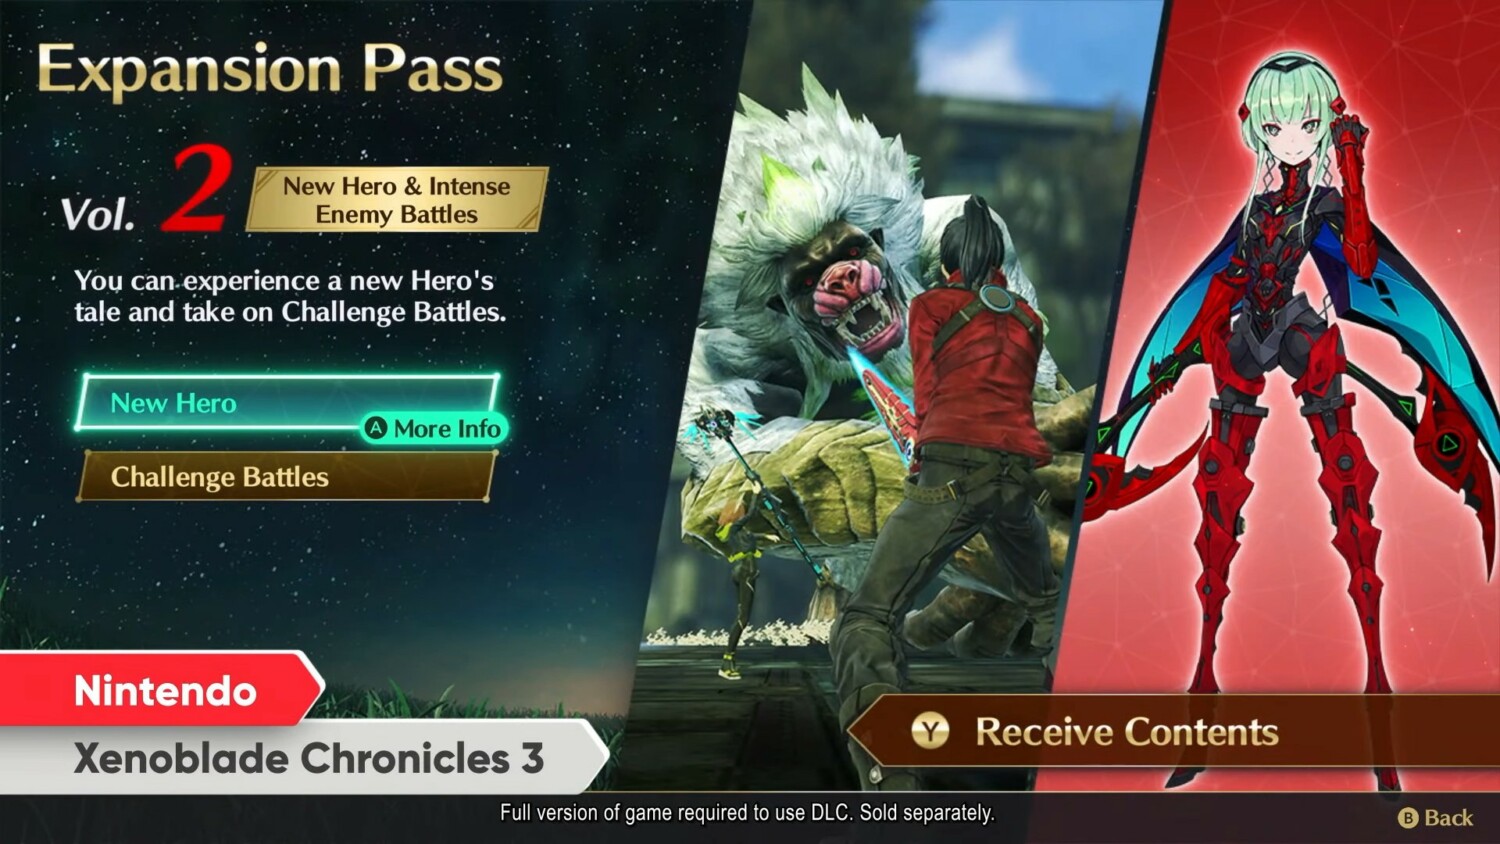 Xenoblade Chronicles 3 Expansion Pass announced